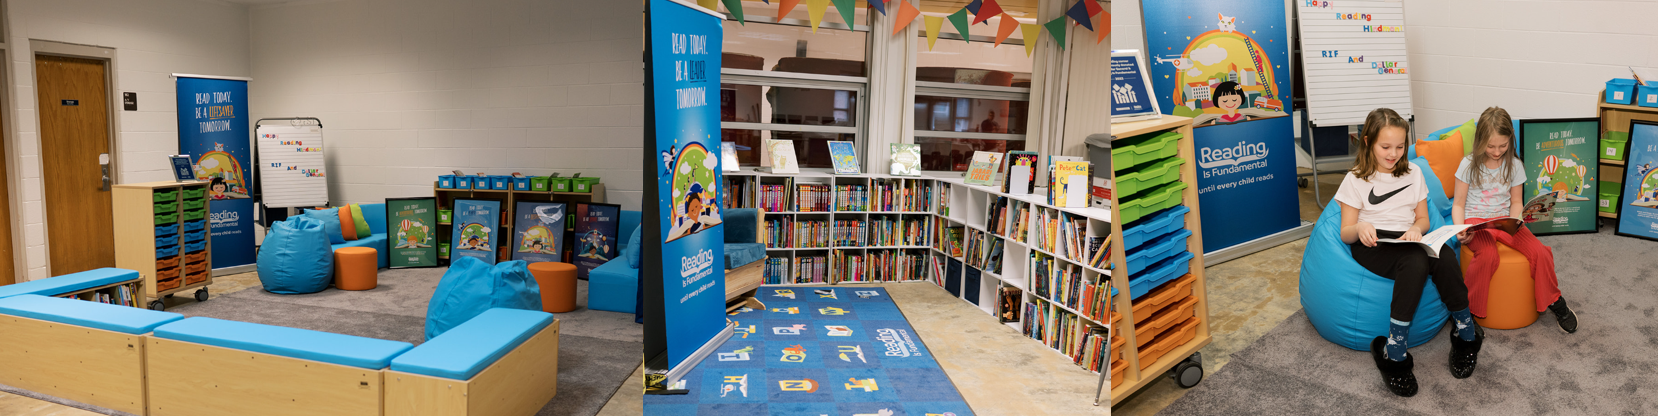 A set of three images. From left to right, they show a library reading center, a set of bookshelves around a custom rug, and a pair of girls reading in the newly created reading center.